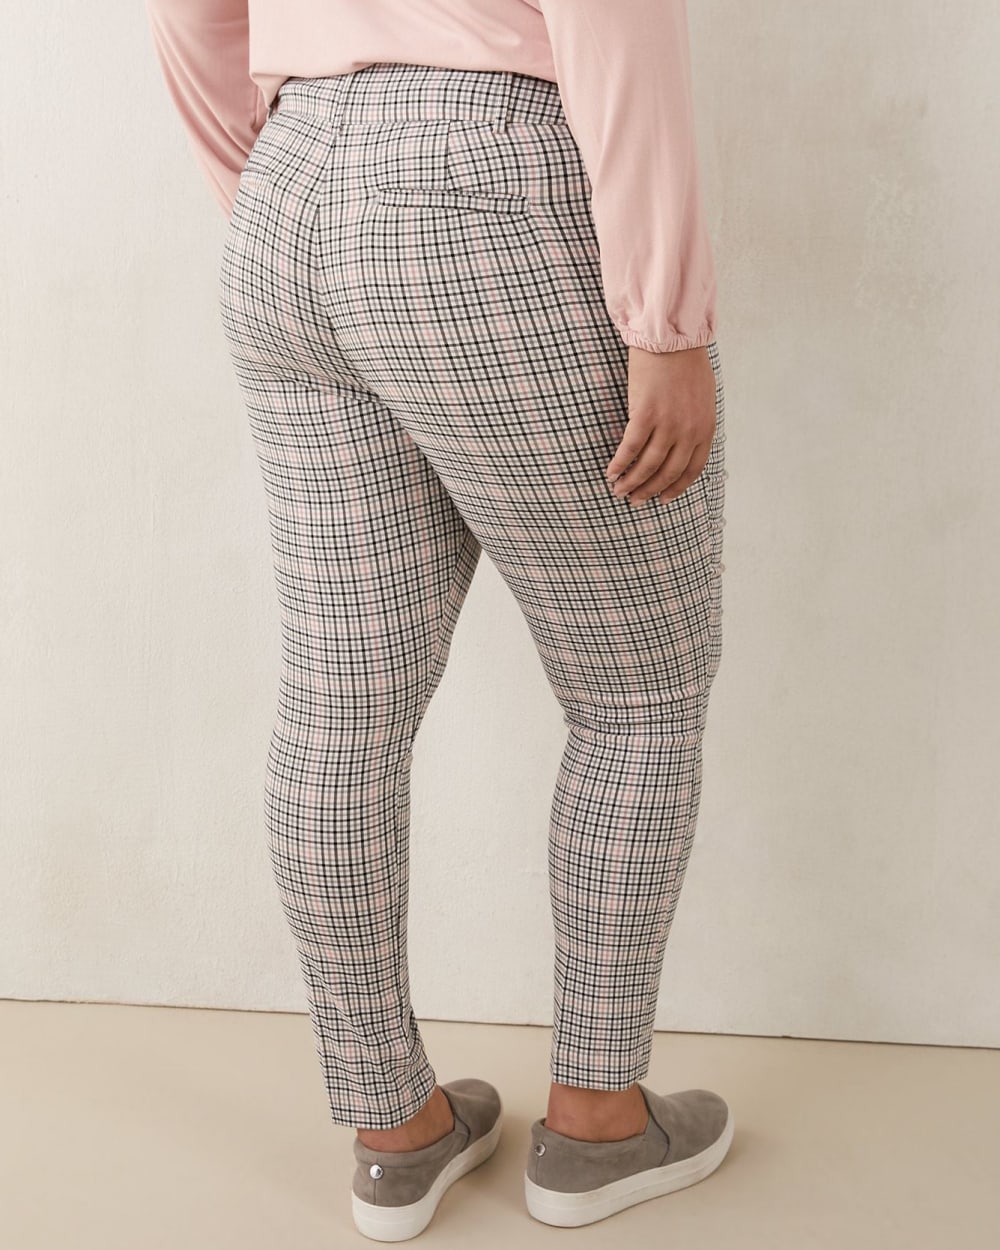 Gingham-Print Savvy Fit Skinny Leg Pants - In Every Story